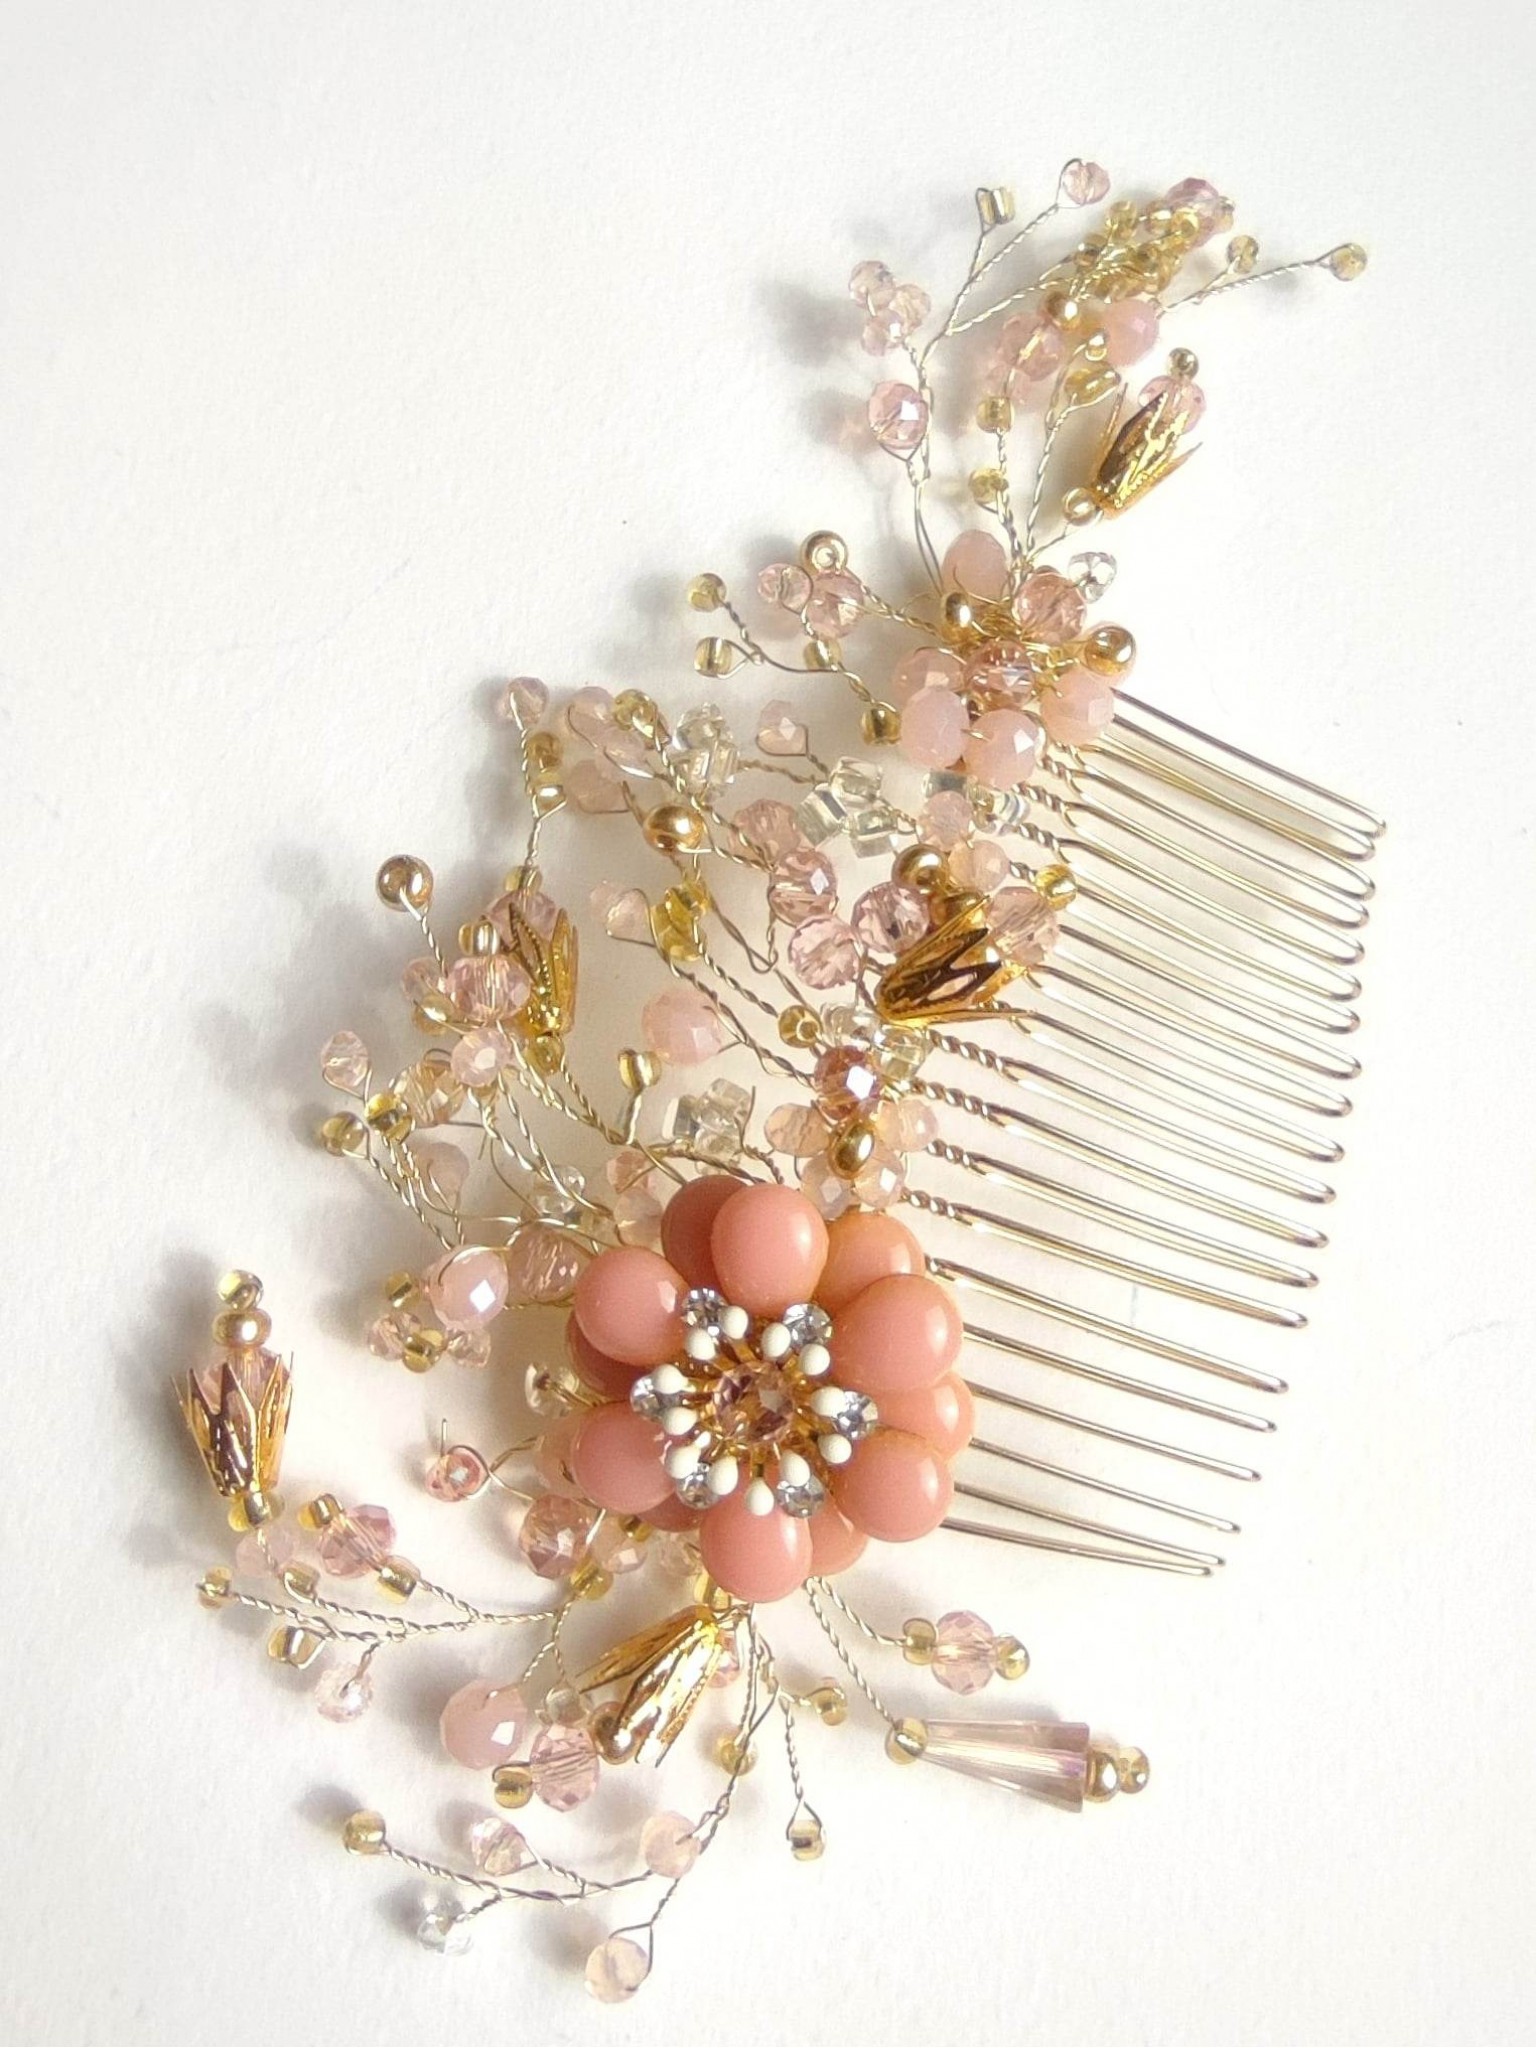 Stylish Hair comb Headpiece and Bracelet set in Peach and Gold colors - Romantic Princess